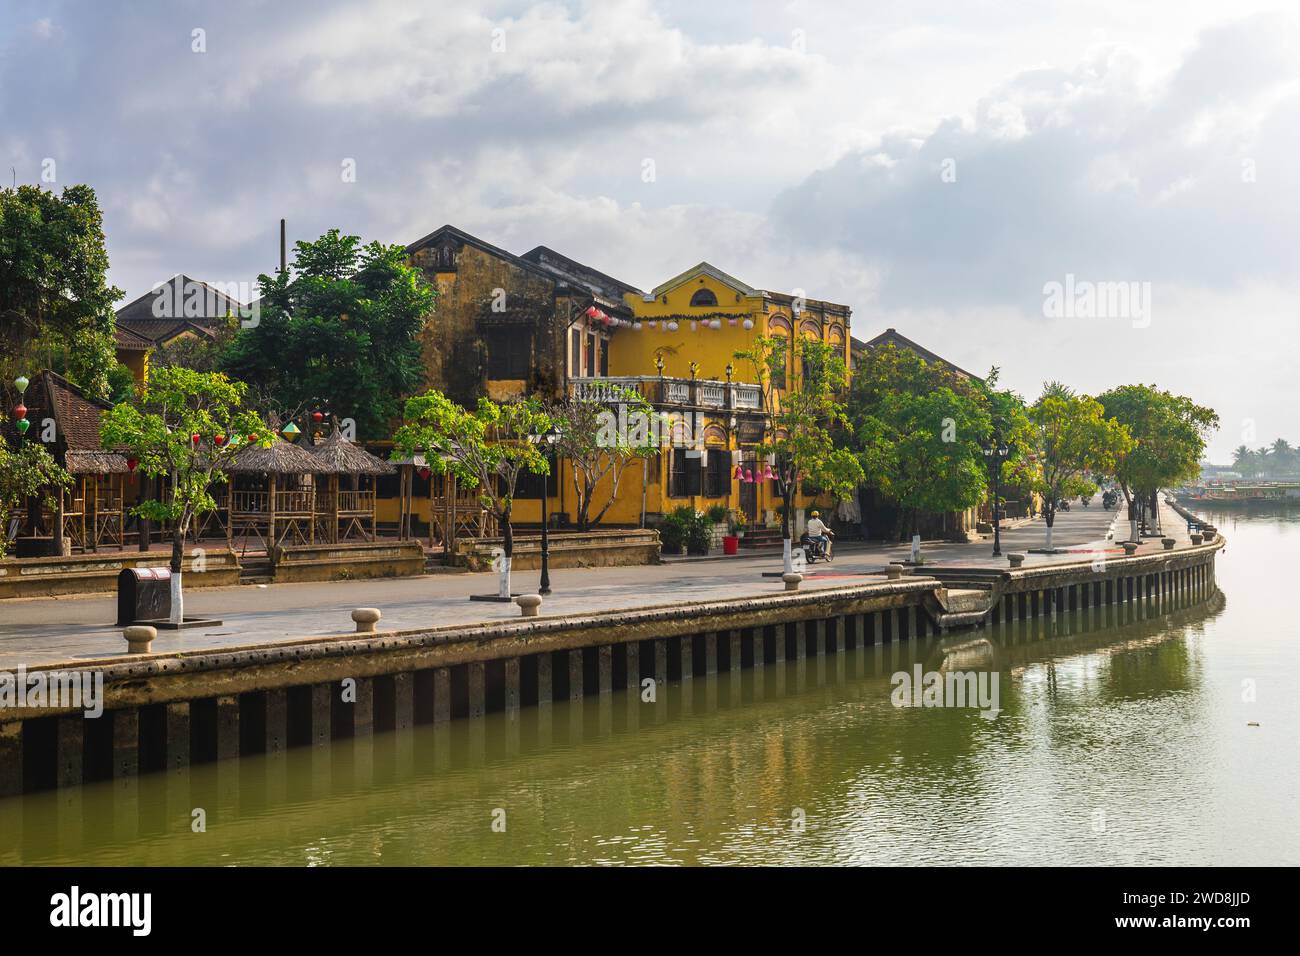 Scenery of the riverbank of Hoi An ancient town, an unesco heritage site in Vietnam Stock Photo